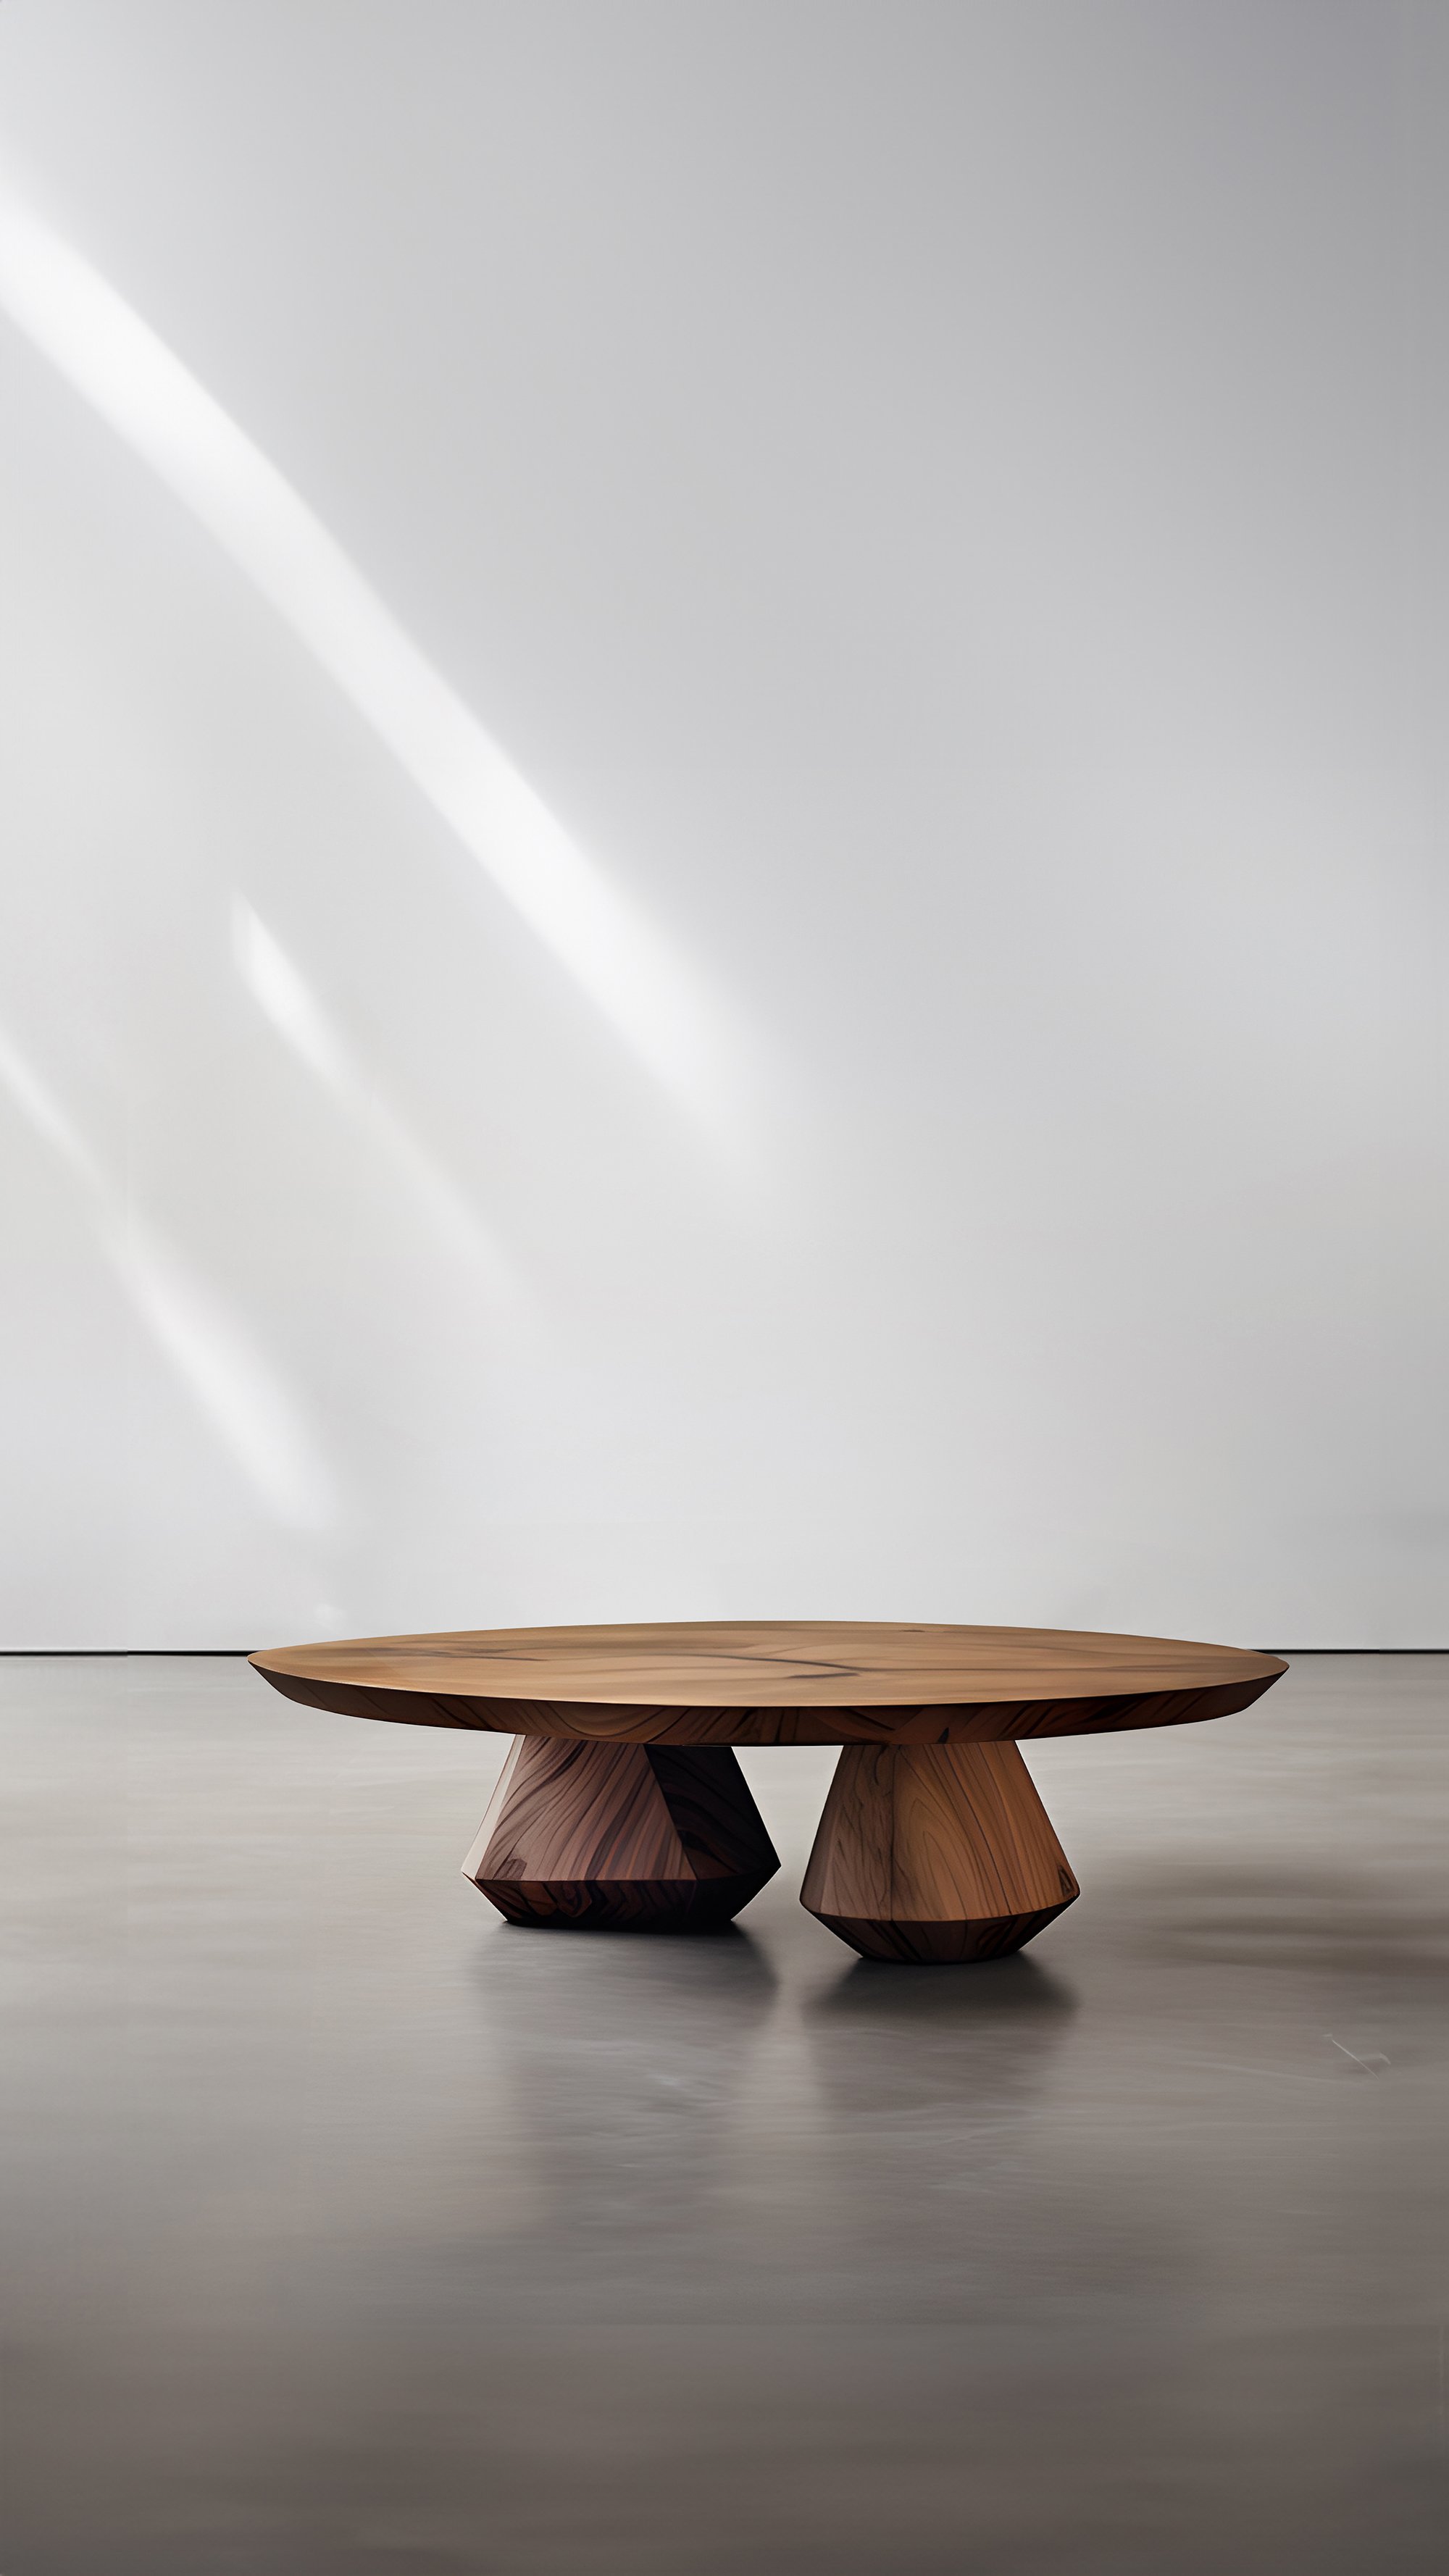 Sculptural Coffee Table Made of Solid Wood, Center Table Solace S45 by Joel Escalona — 6.jpg